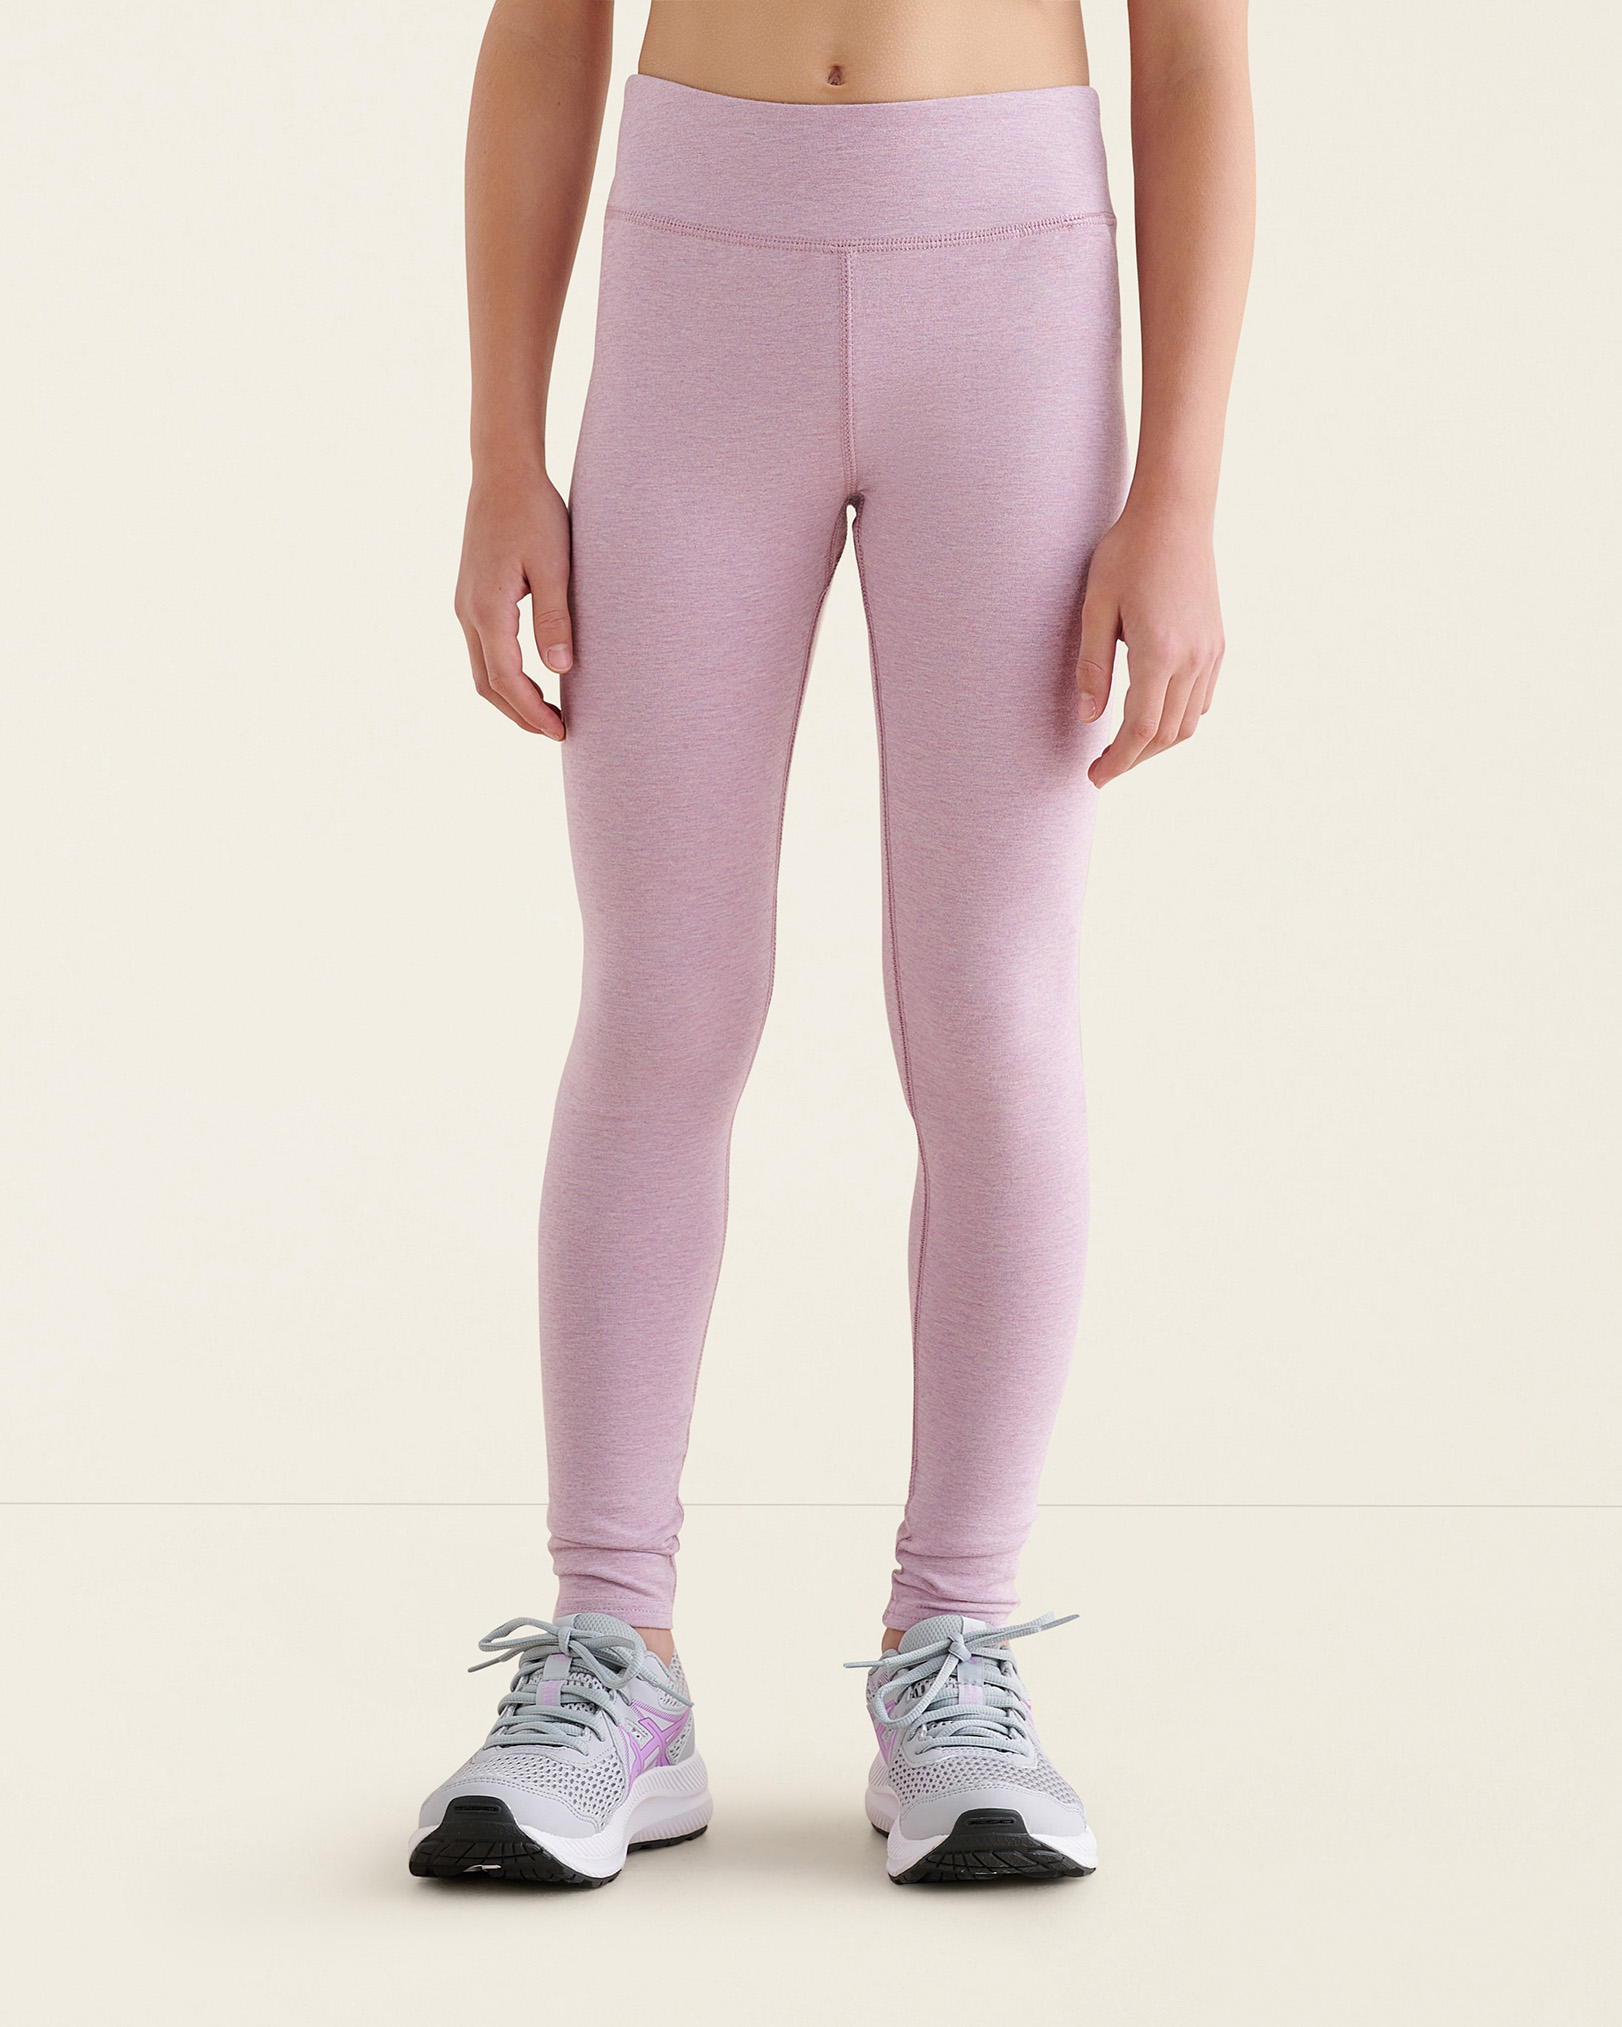 Roots Girl's Easy Stretch Legging Pants in Purple Thistle Mix